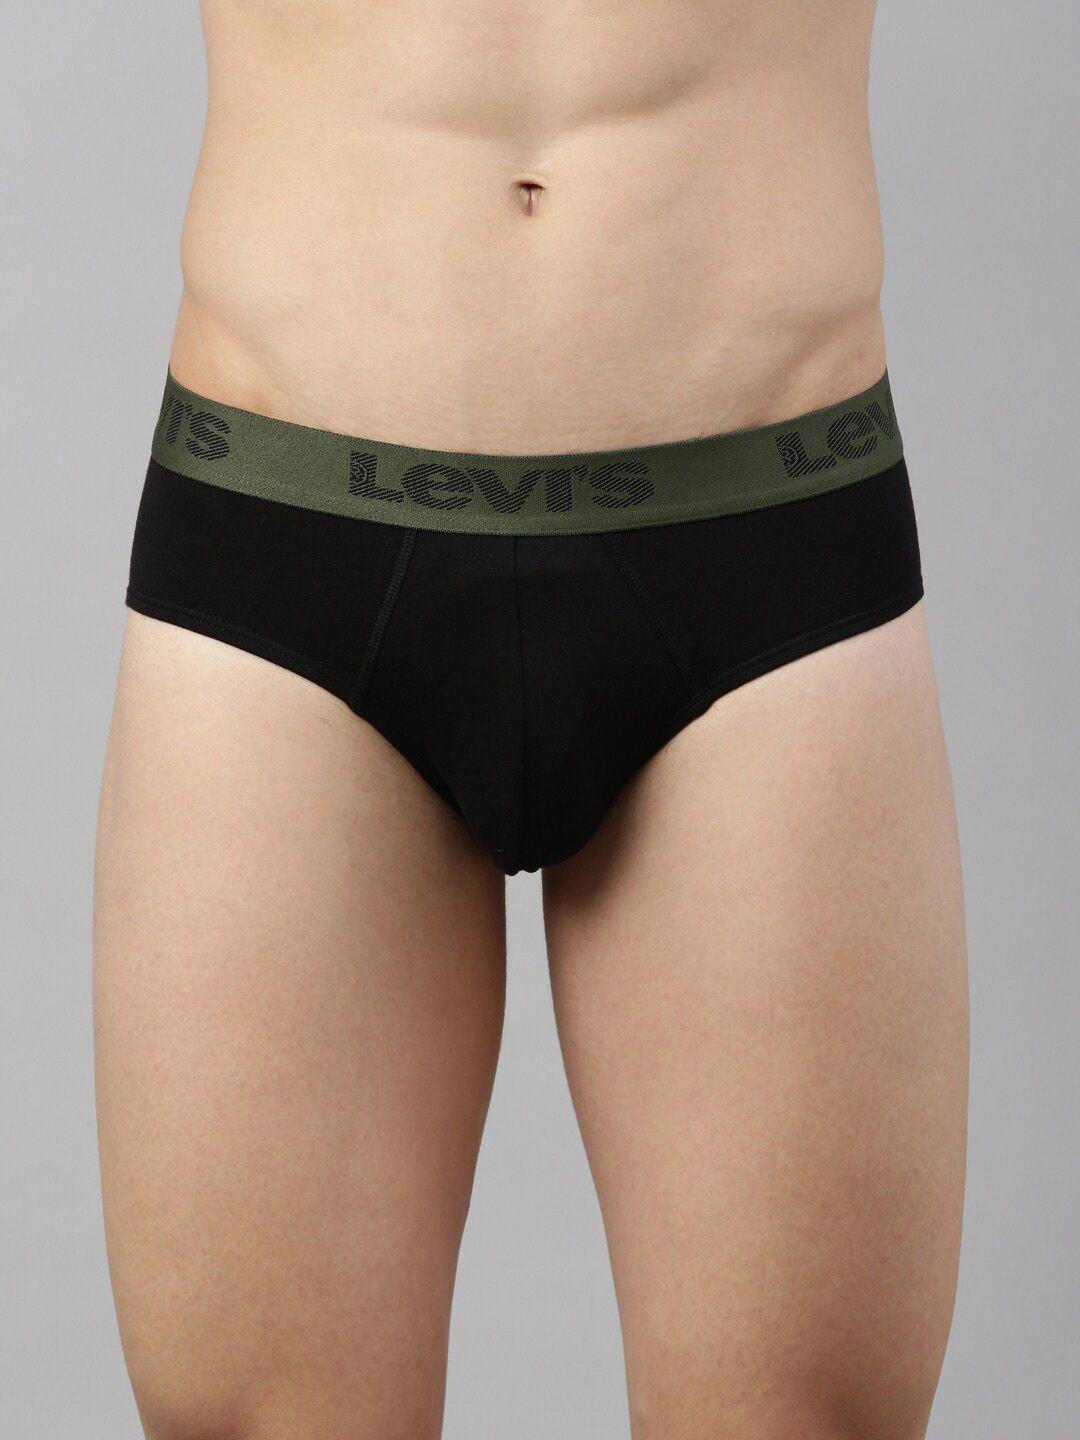 levis-men-smartskin-technology-cotton-active-briefs-with-tag-free-comfort-066